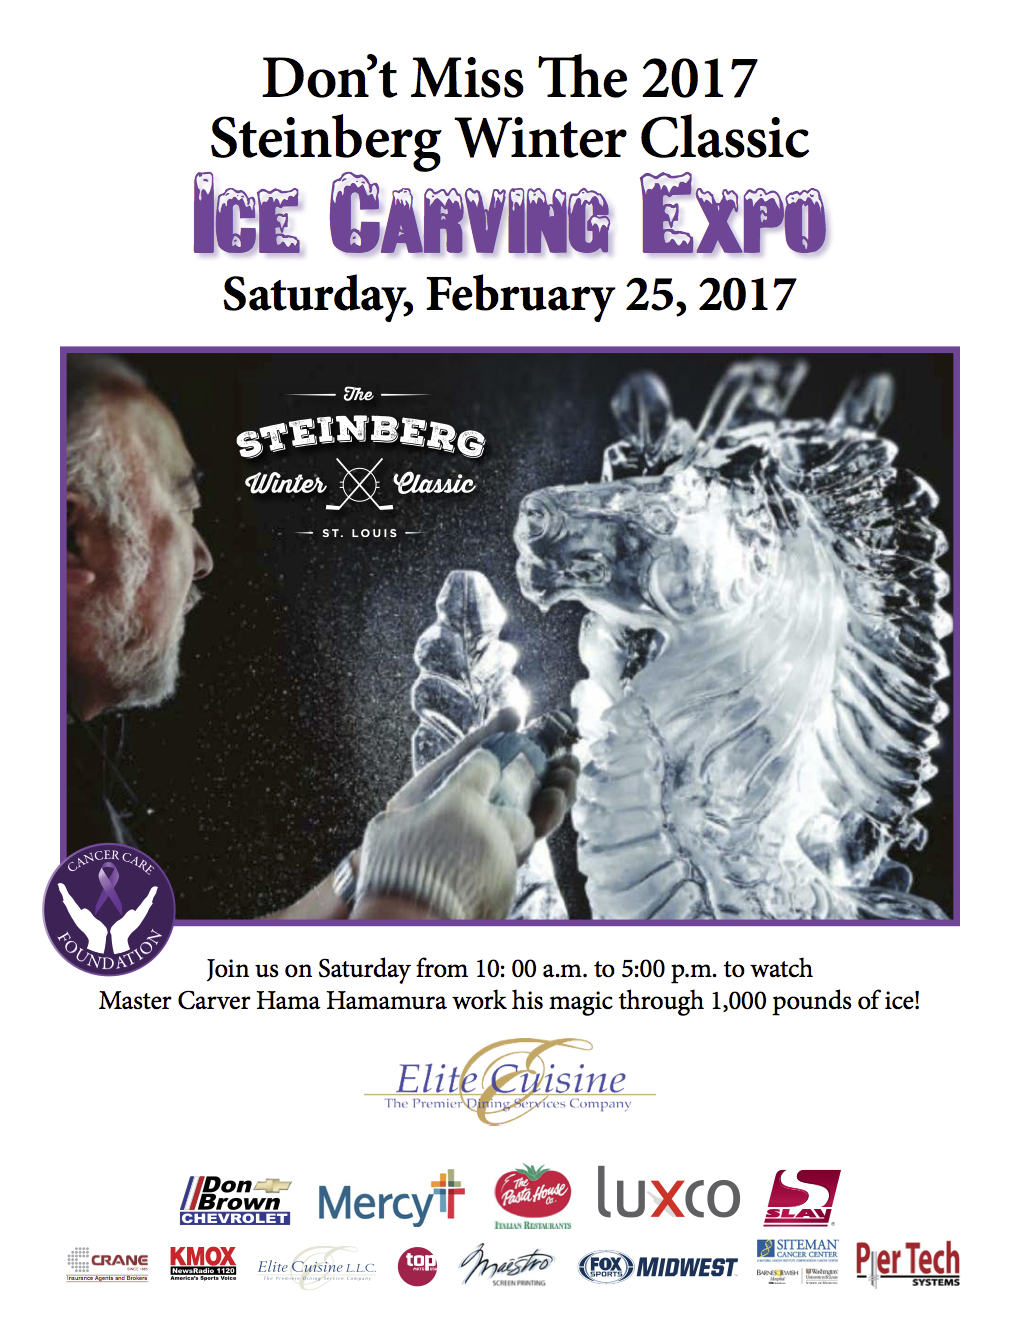 Ice Carving Competition at the Steinberg Winter Classic